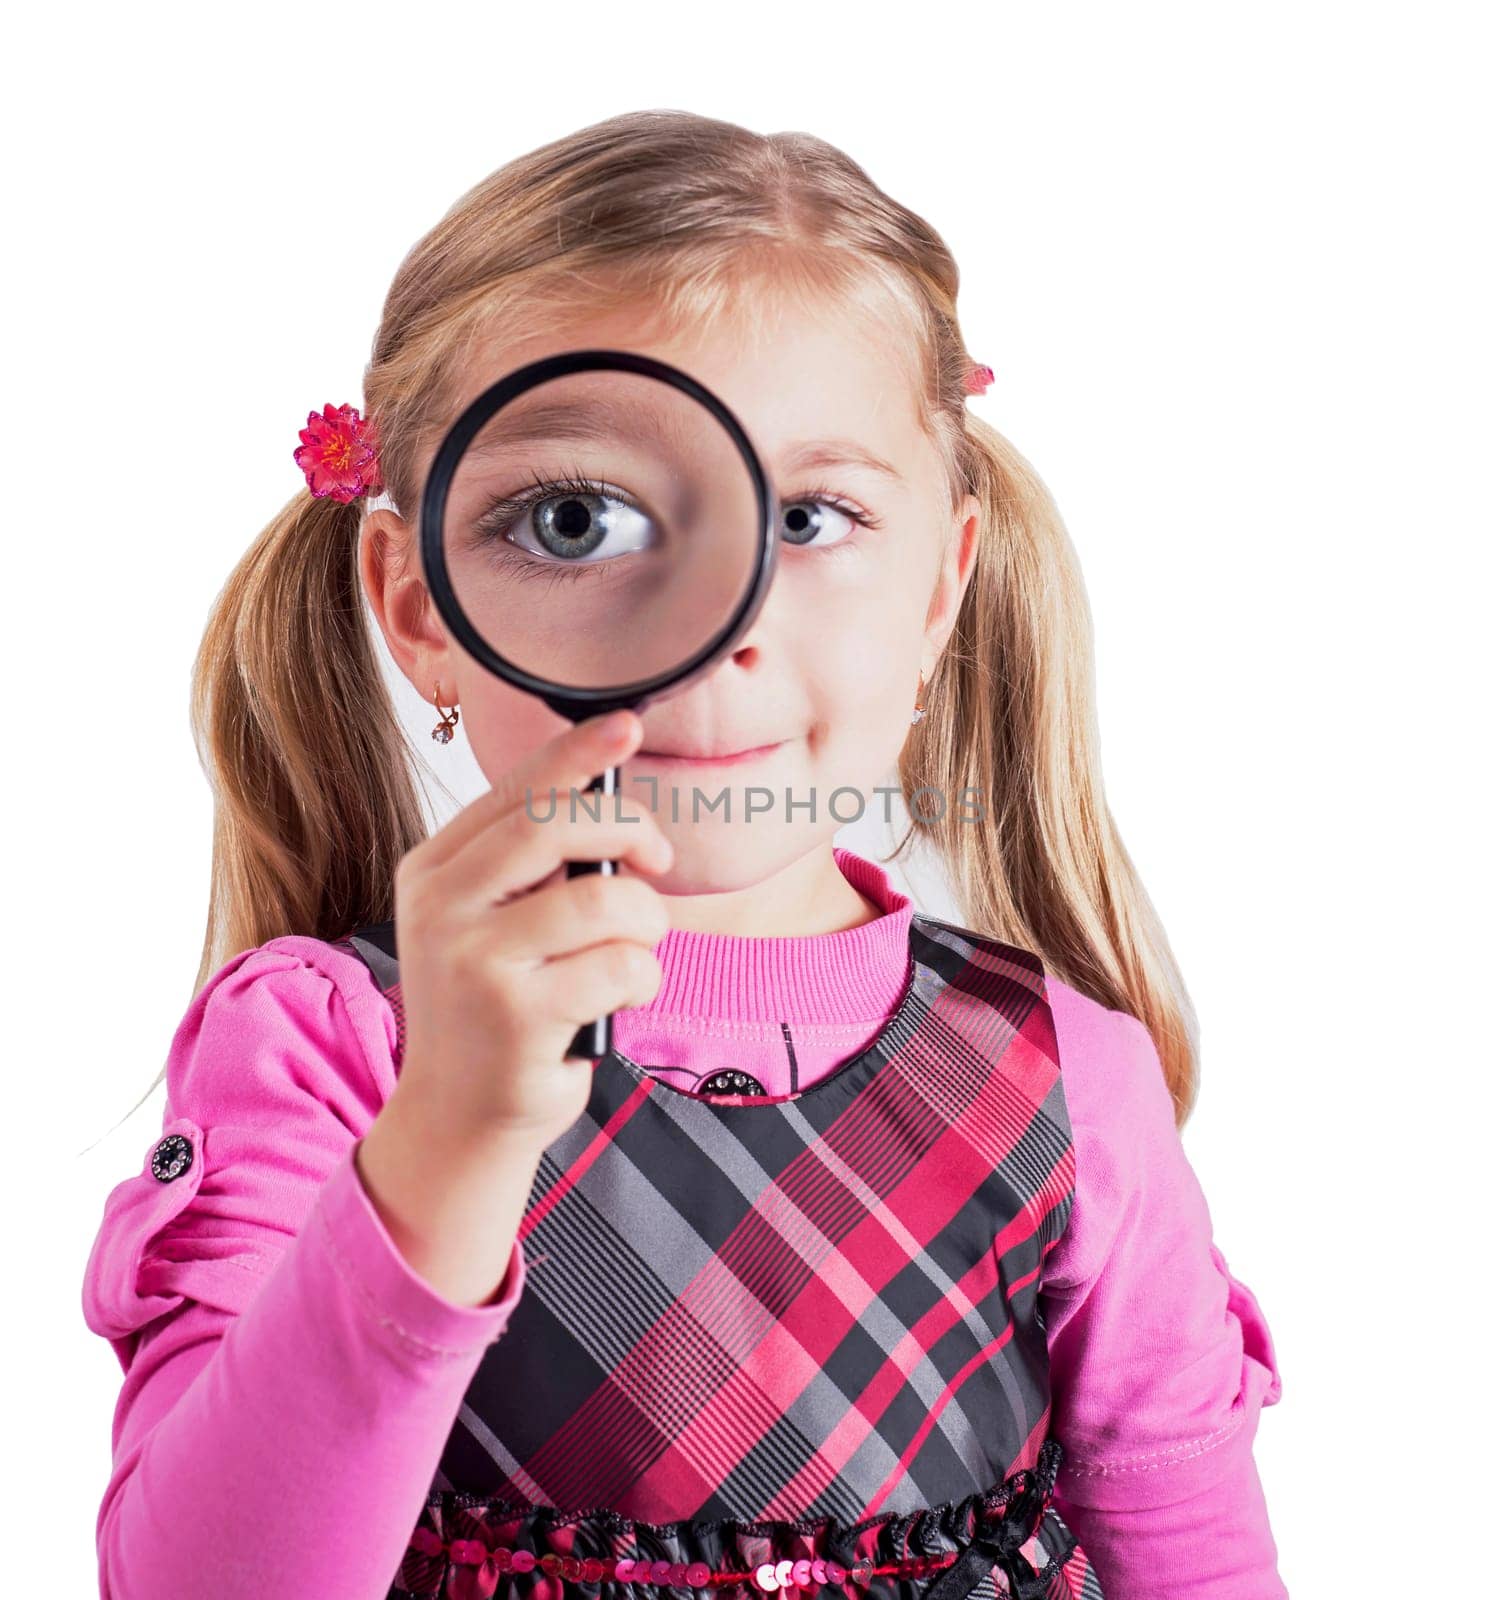 The concept of eye disease and education. An inquisitive child. A beautiful little girl looks into a magnifying glass. The eye is enlarged by aprilphoto